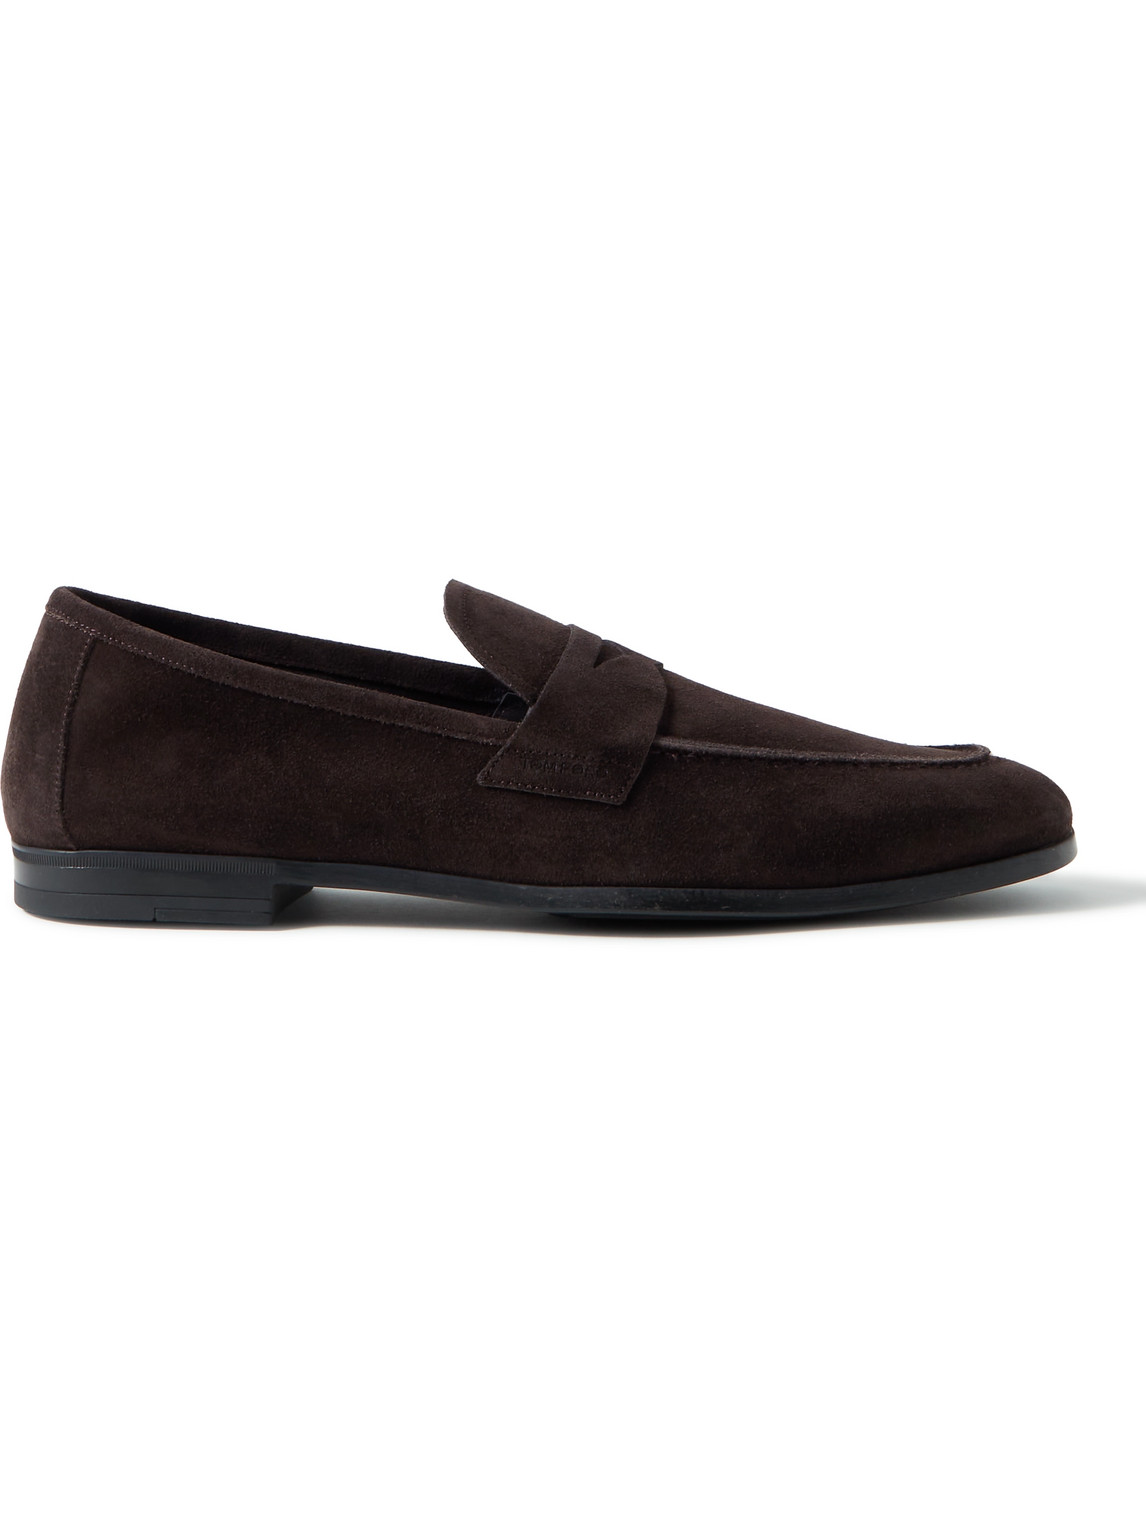 Sean Suede Penny Loafers